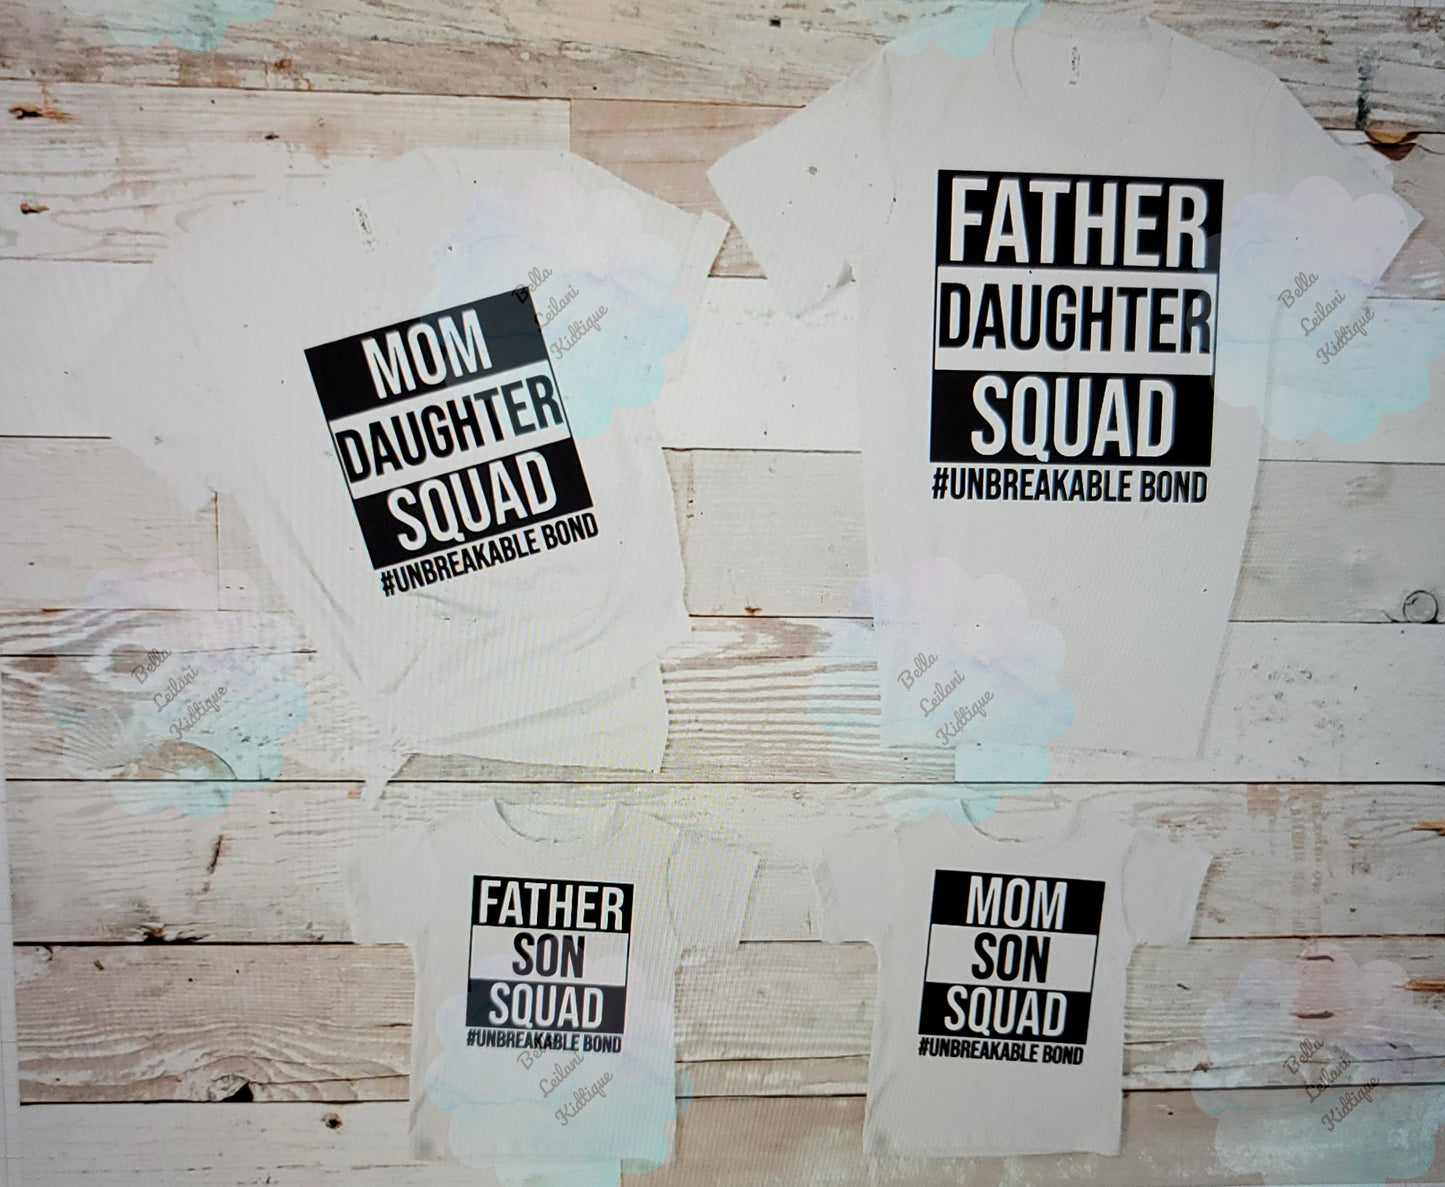 Father Daughter Squad- kids